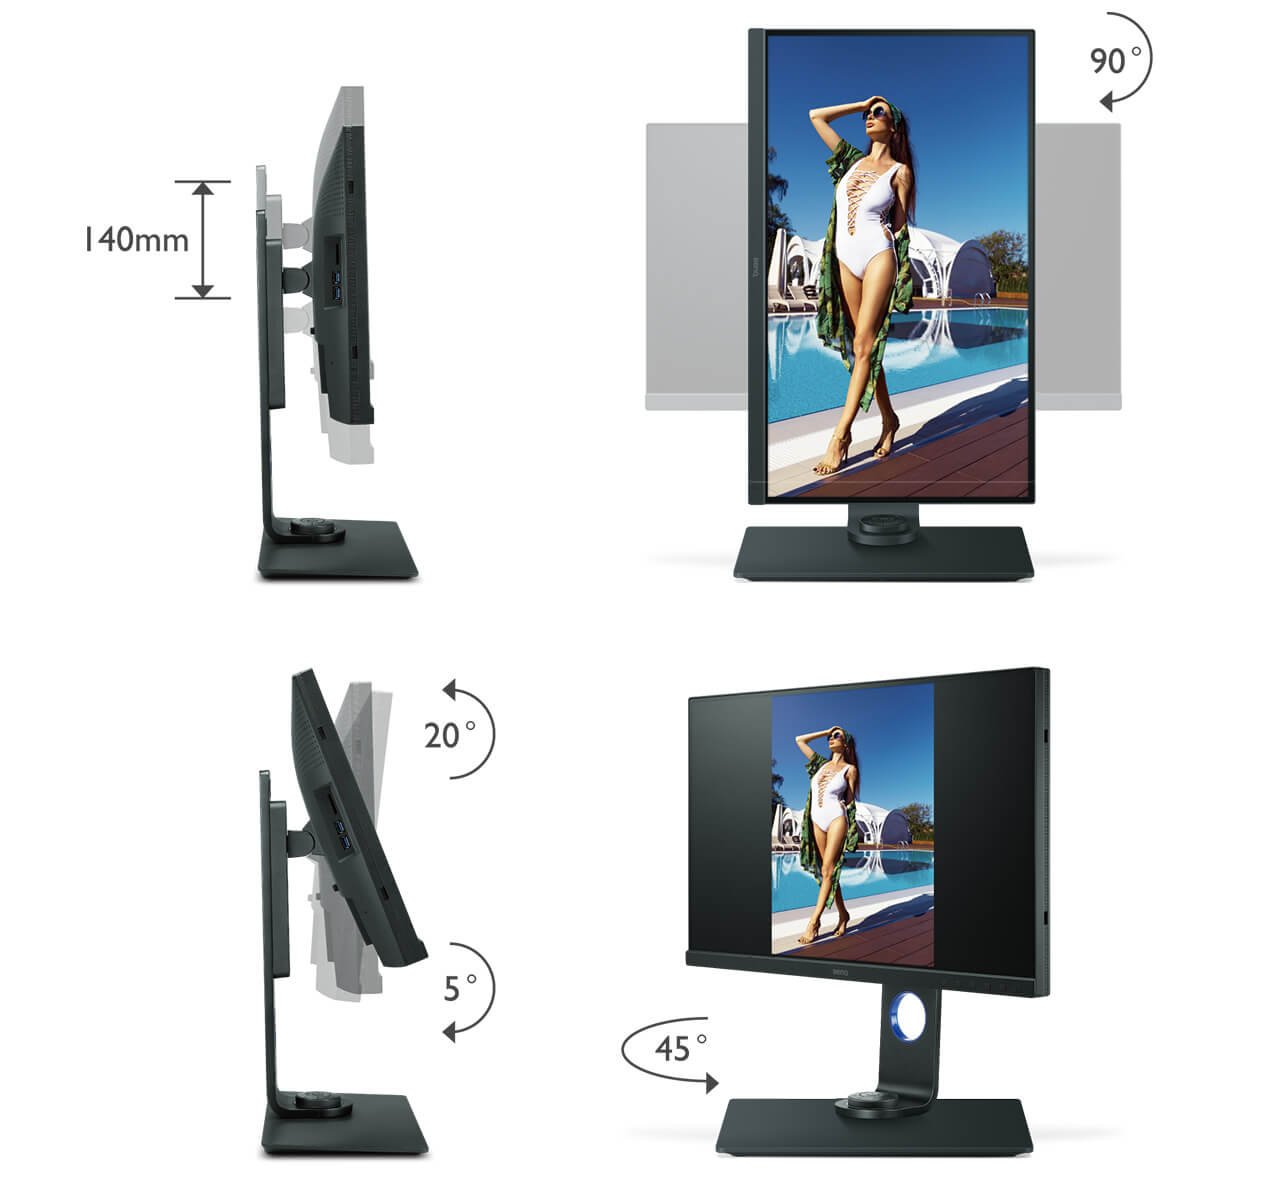 The monitor with rapid adjustment to height, swivel and pivot is the best choice for designers, office workers and photographers.